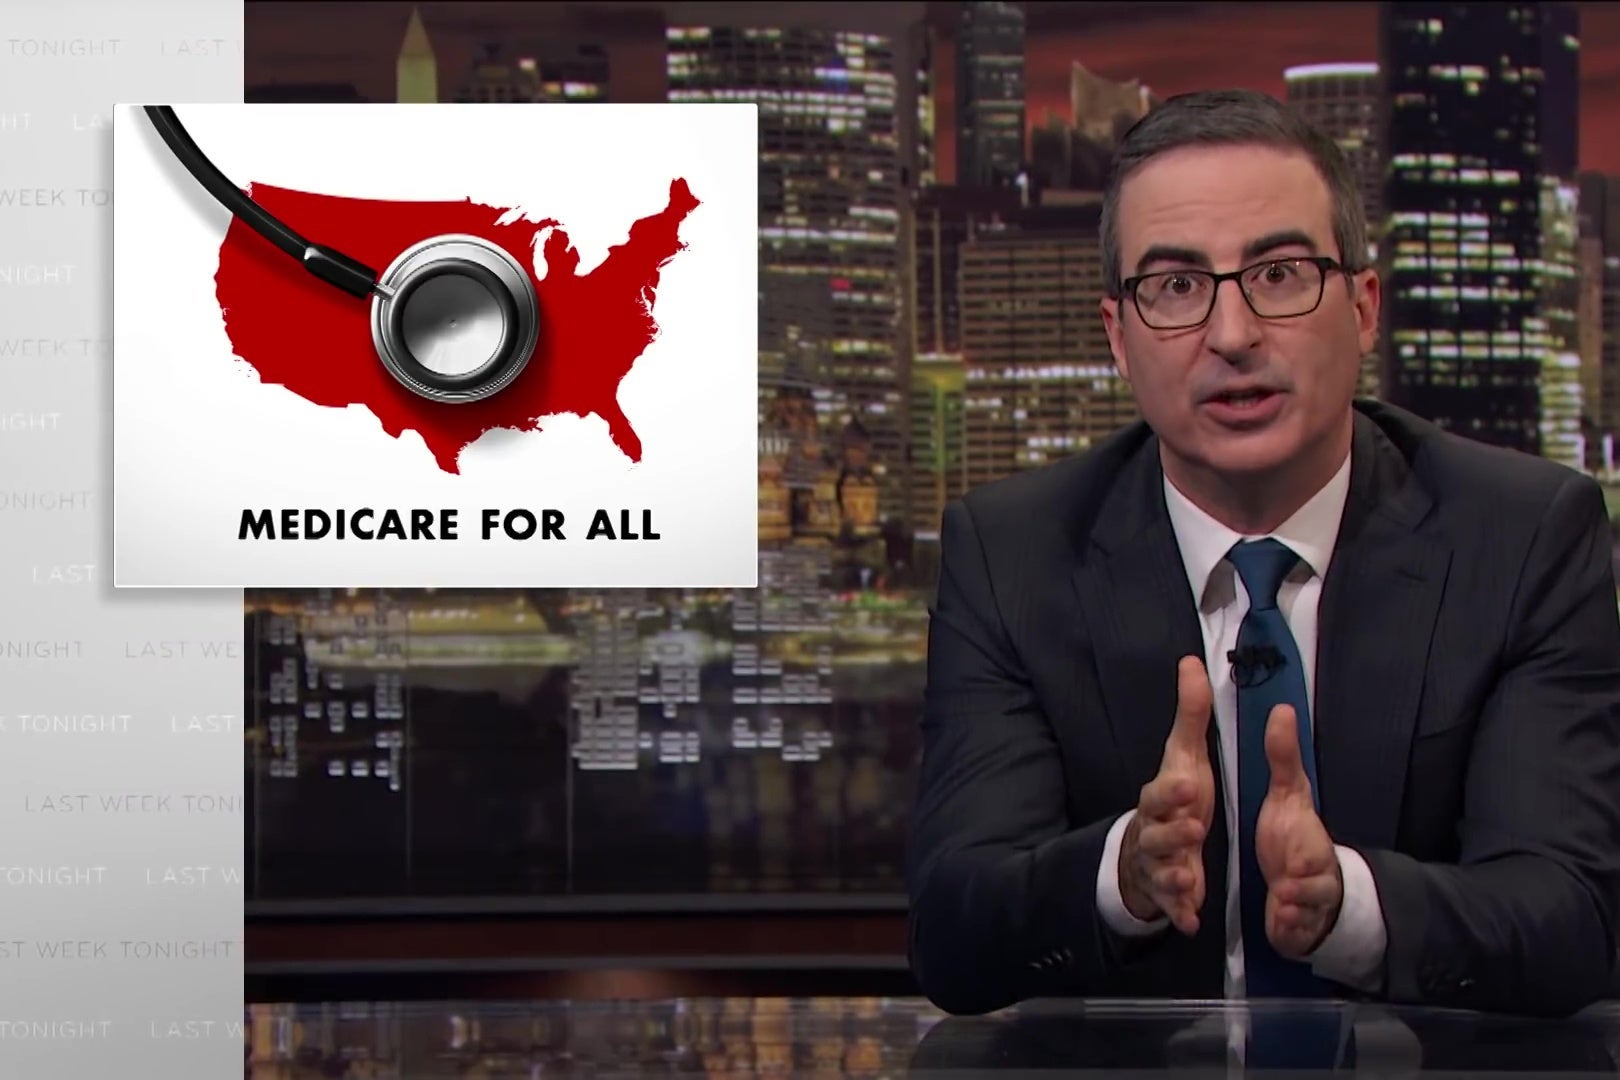 John Oliver sits at an anchorperson's desk, in front of an image reading "Medicare For All."